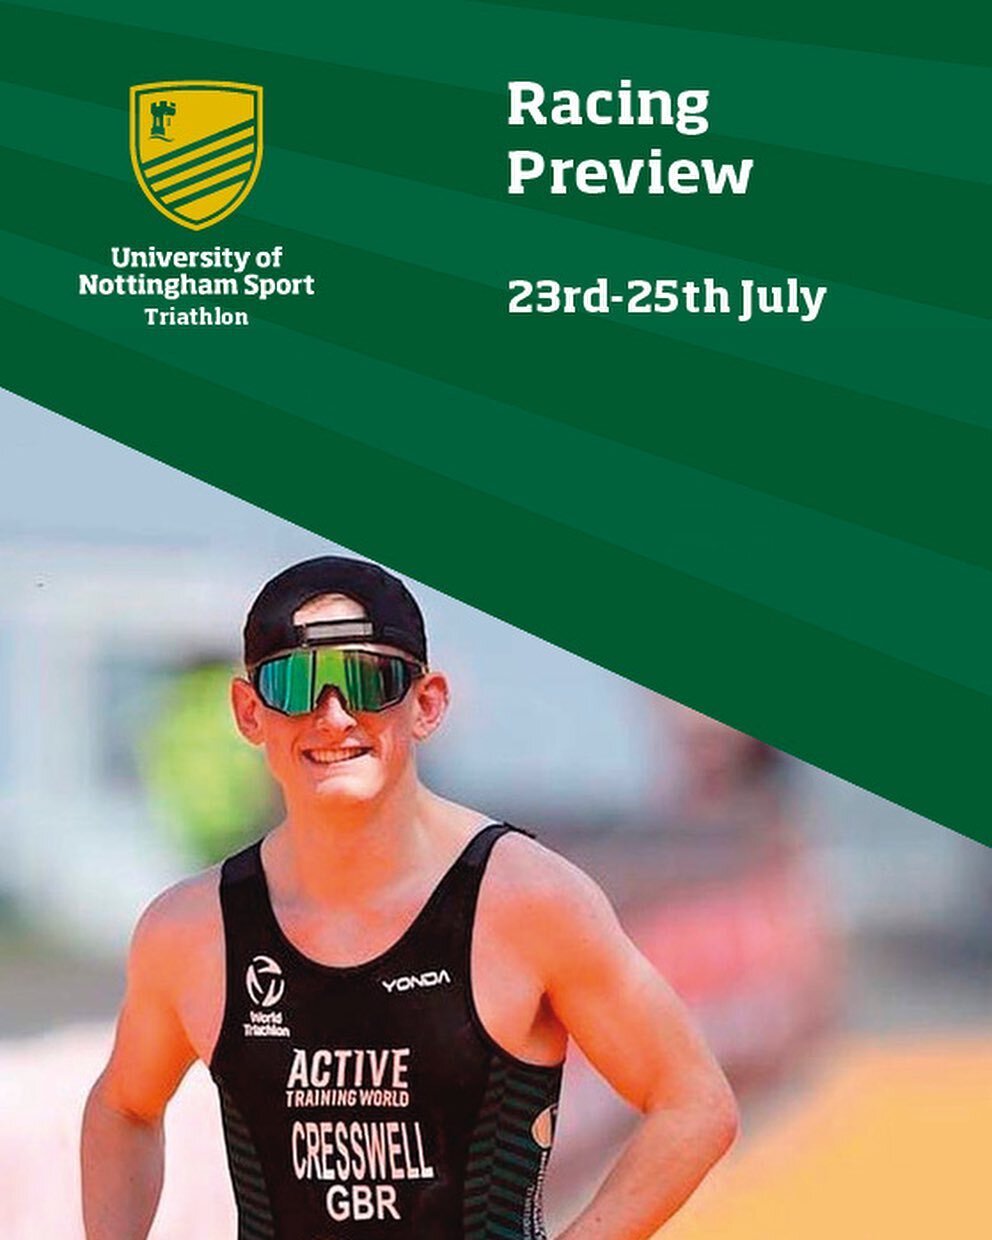 💚💛 Weekend Racing Preview 💚💛

Busy weekend for UoN Tri Athletes!

First up @james_kadziak is racing in his first World Cup in Pontevedra. James will be doing a takeover on our story so look out for some behind the scenes action.

Next we have our